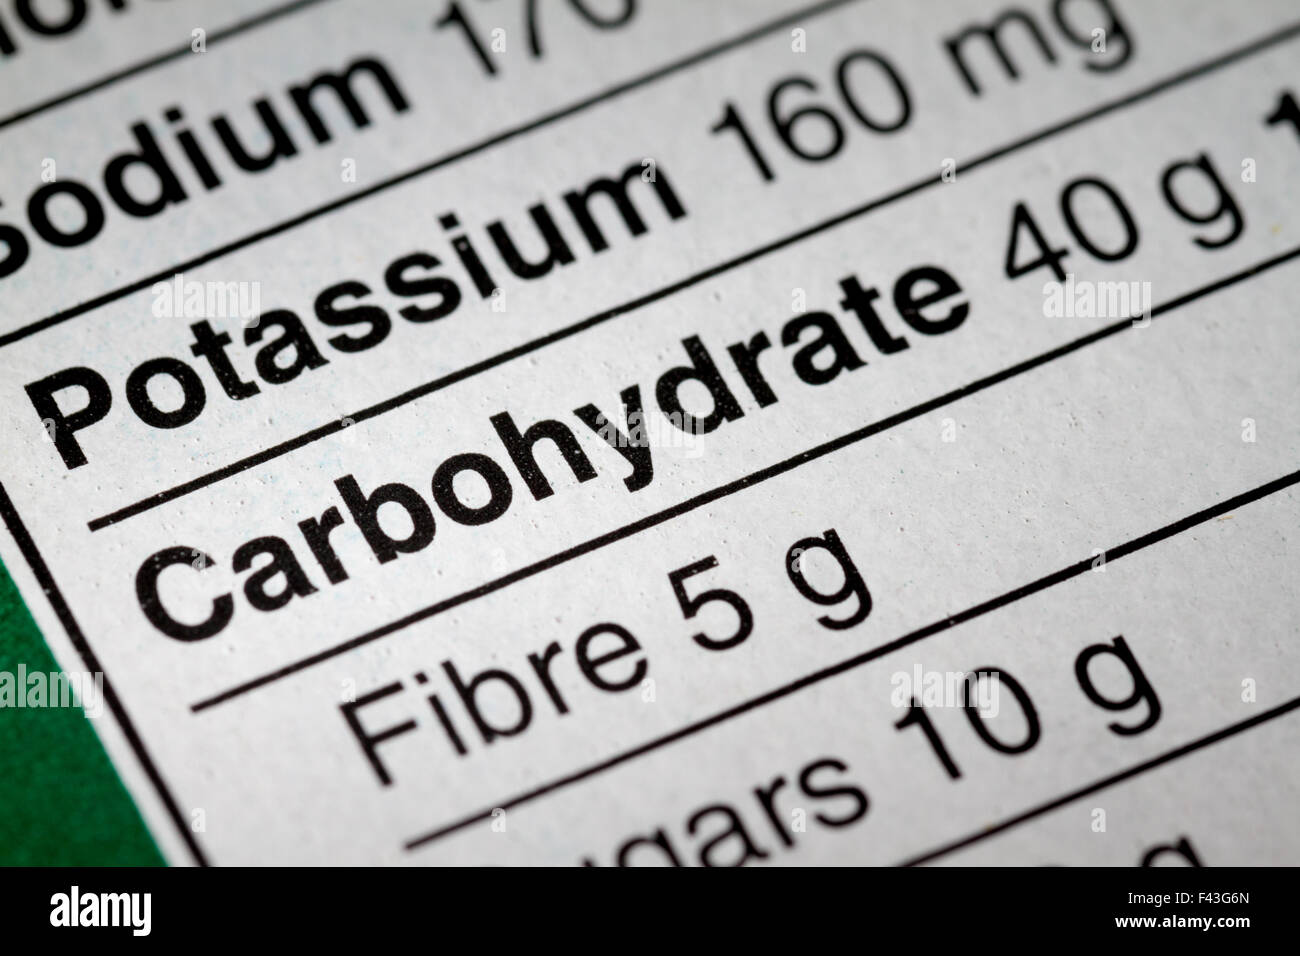 Shallow depth of Field image of Nutrition Facts Carbohydrate Information we can find on a grocery Store Product. Stock Photo